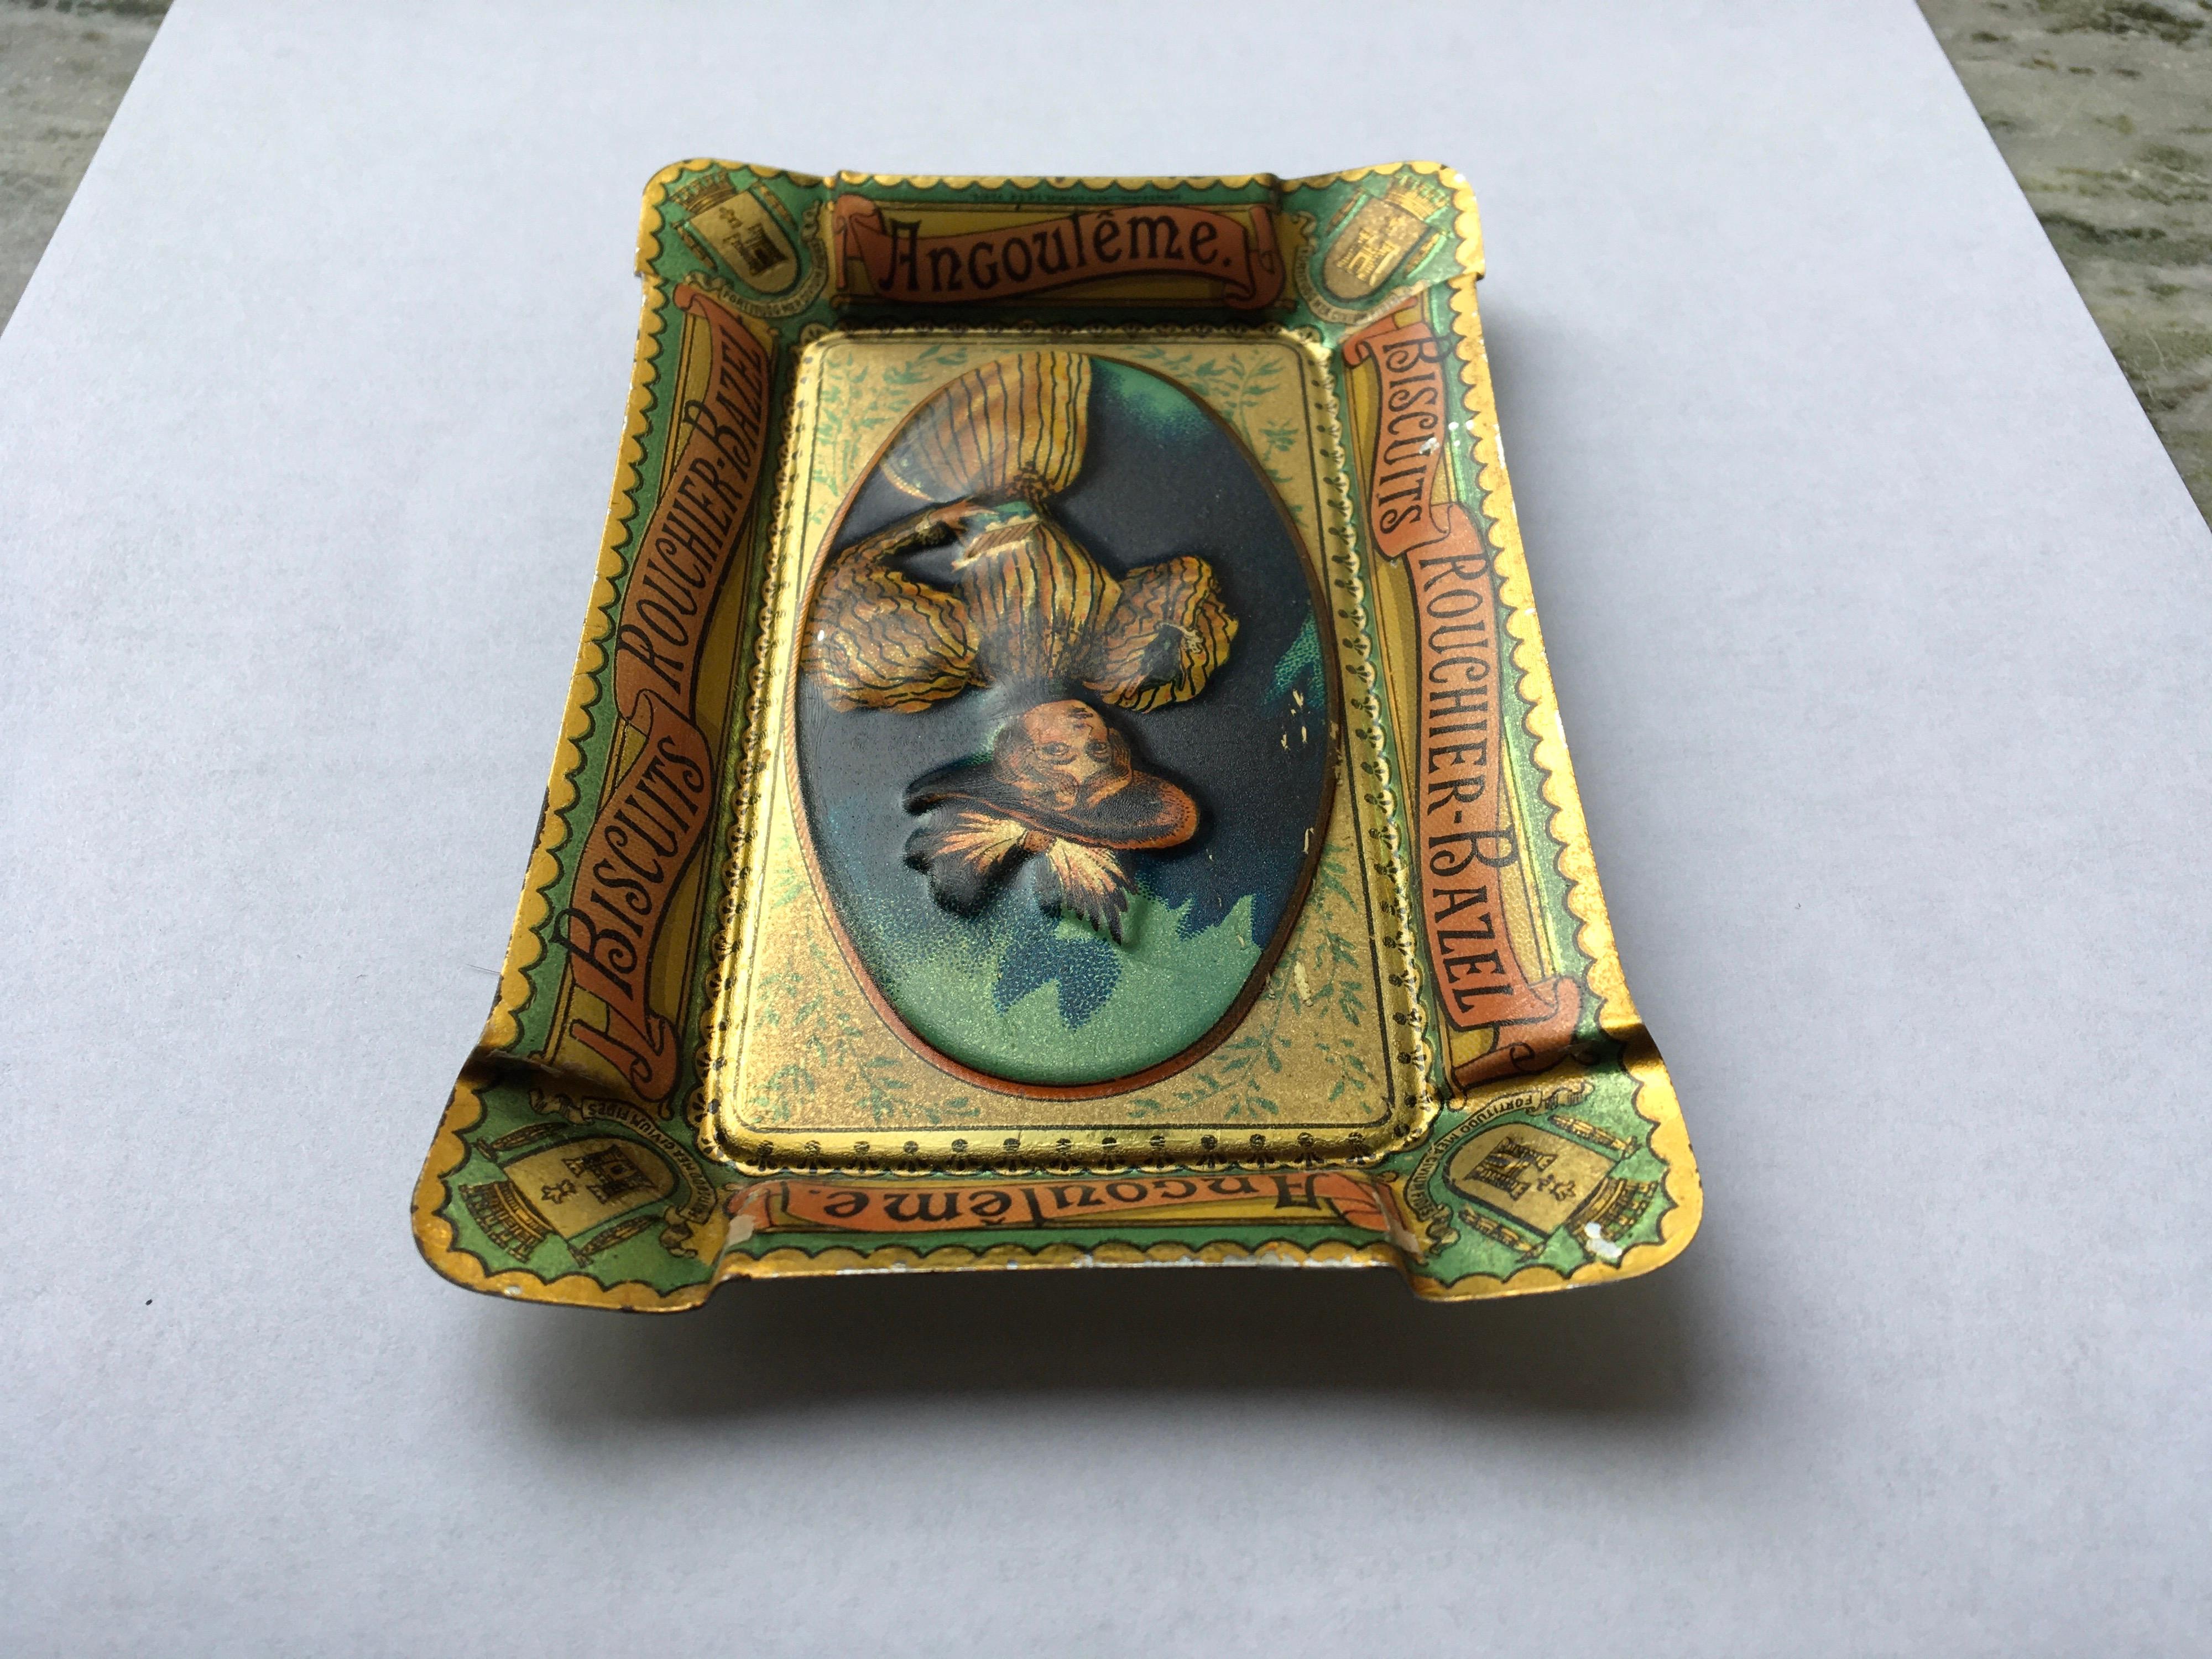 Antique Litho Tin Tray or Ashtray for Biscuits Rouchier Bazel France, circa 1900 1